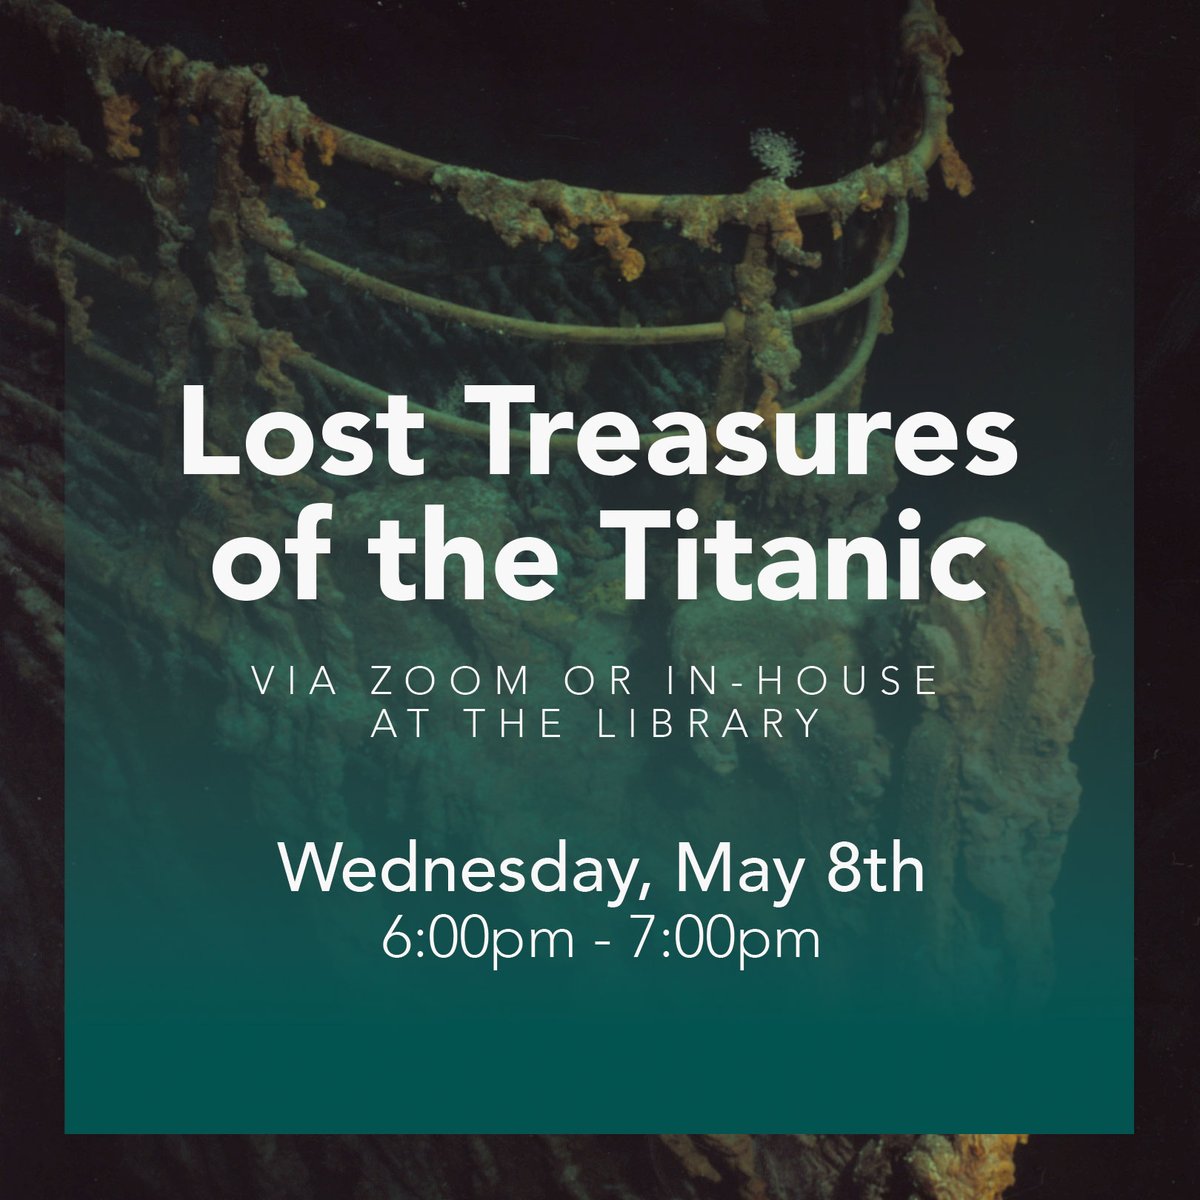 Visit our website to register. The Zoom link will be sent with your reminder E-mail. You can also view this program on-screen at the library.

#losttreasuresofthetitanic #titanic #titanicdiscoveries #history #hhﬂ #librariesrock